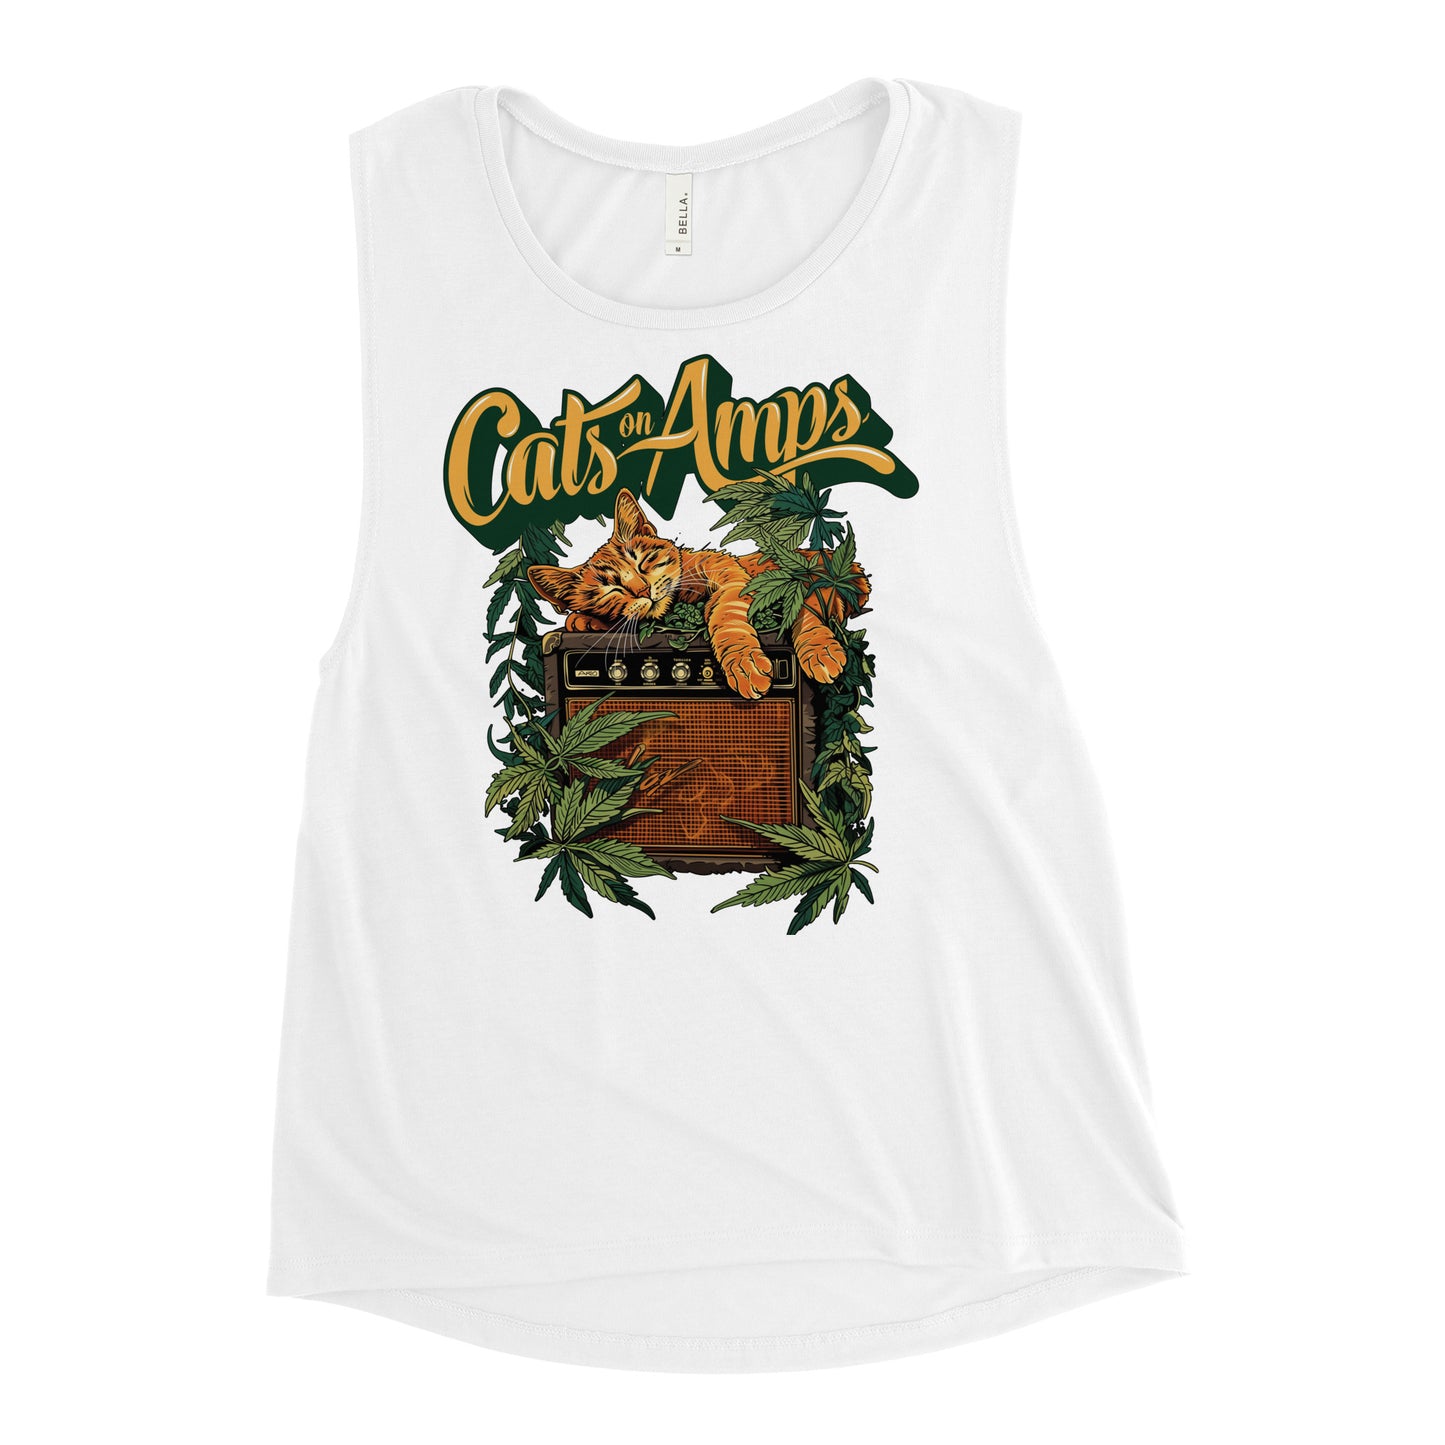 CATS ON AMPS - 420 Sleeper - Ladies’ Muscle Tank